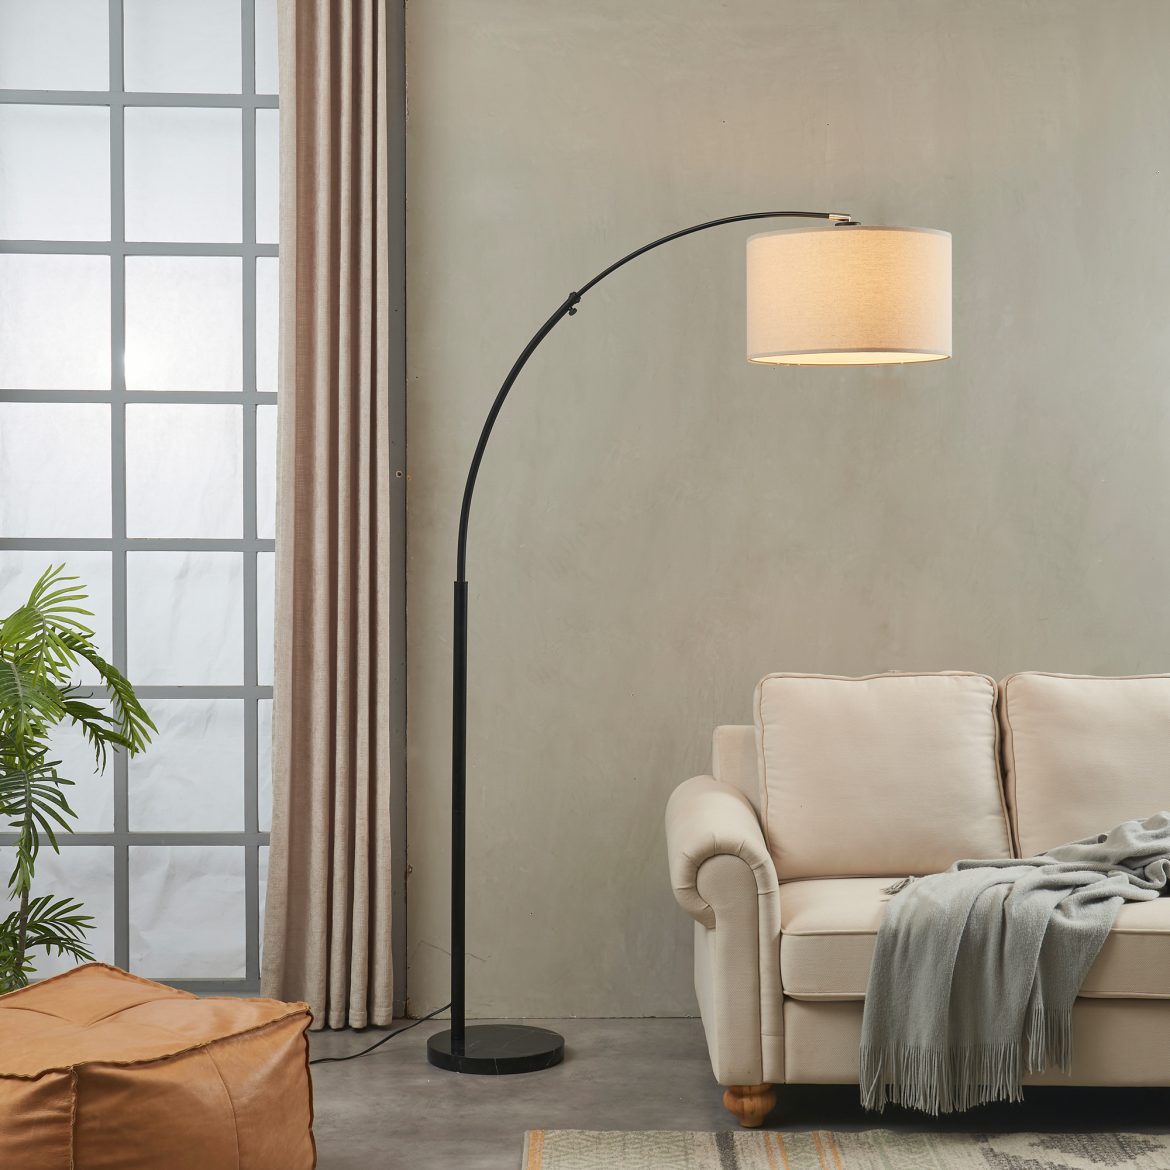 Light Up Your Life with the Perfect Lamp: Choosing the Right Light to Brighten Up Your Space